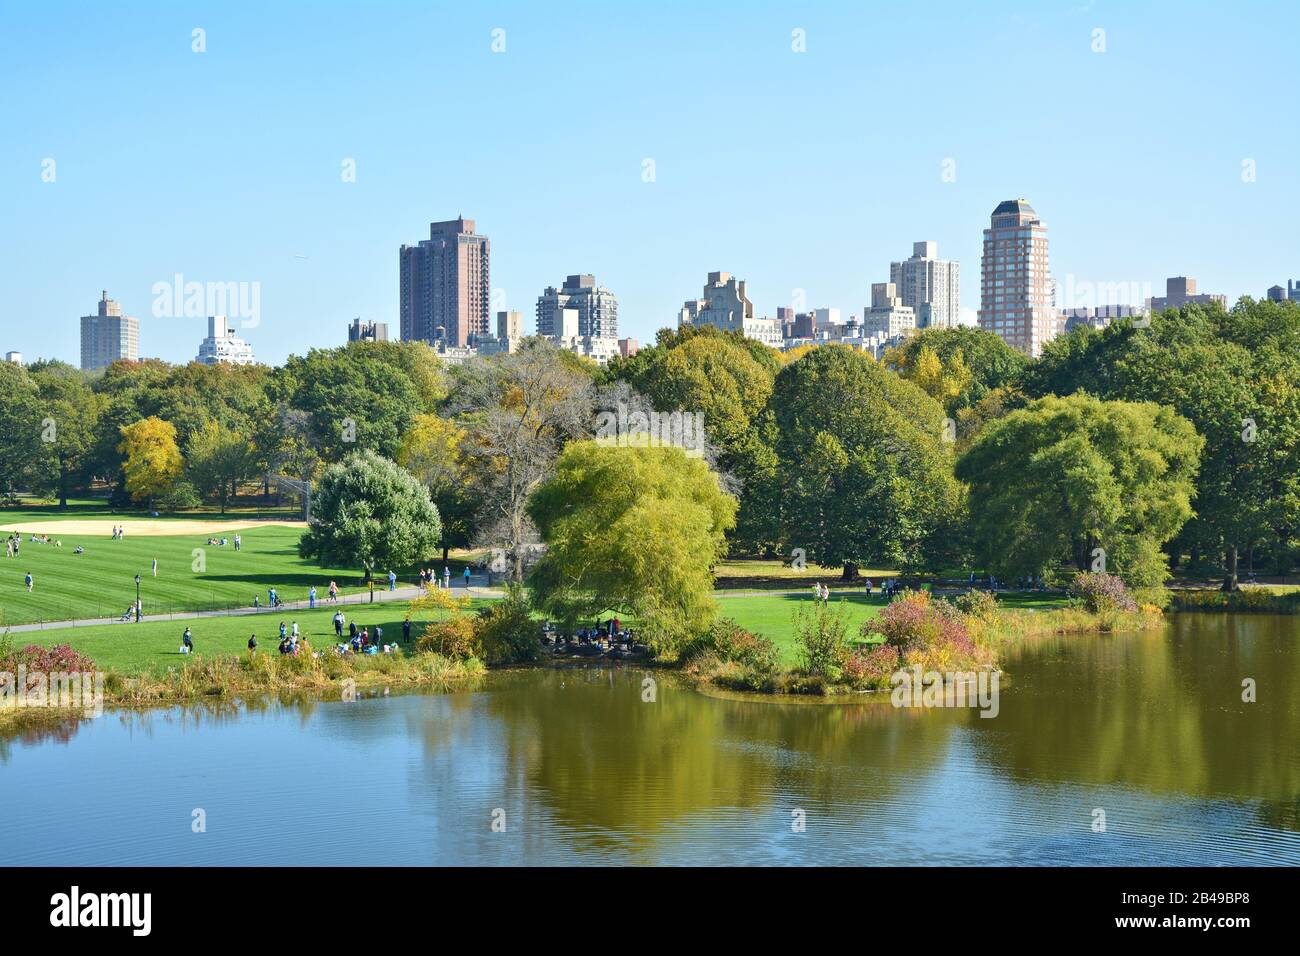 Turtle Pond in Central Park in Manhattan, New York City Stock Photo